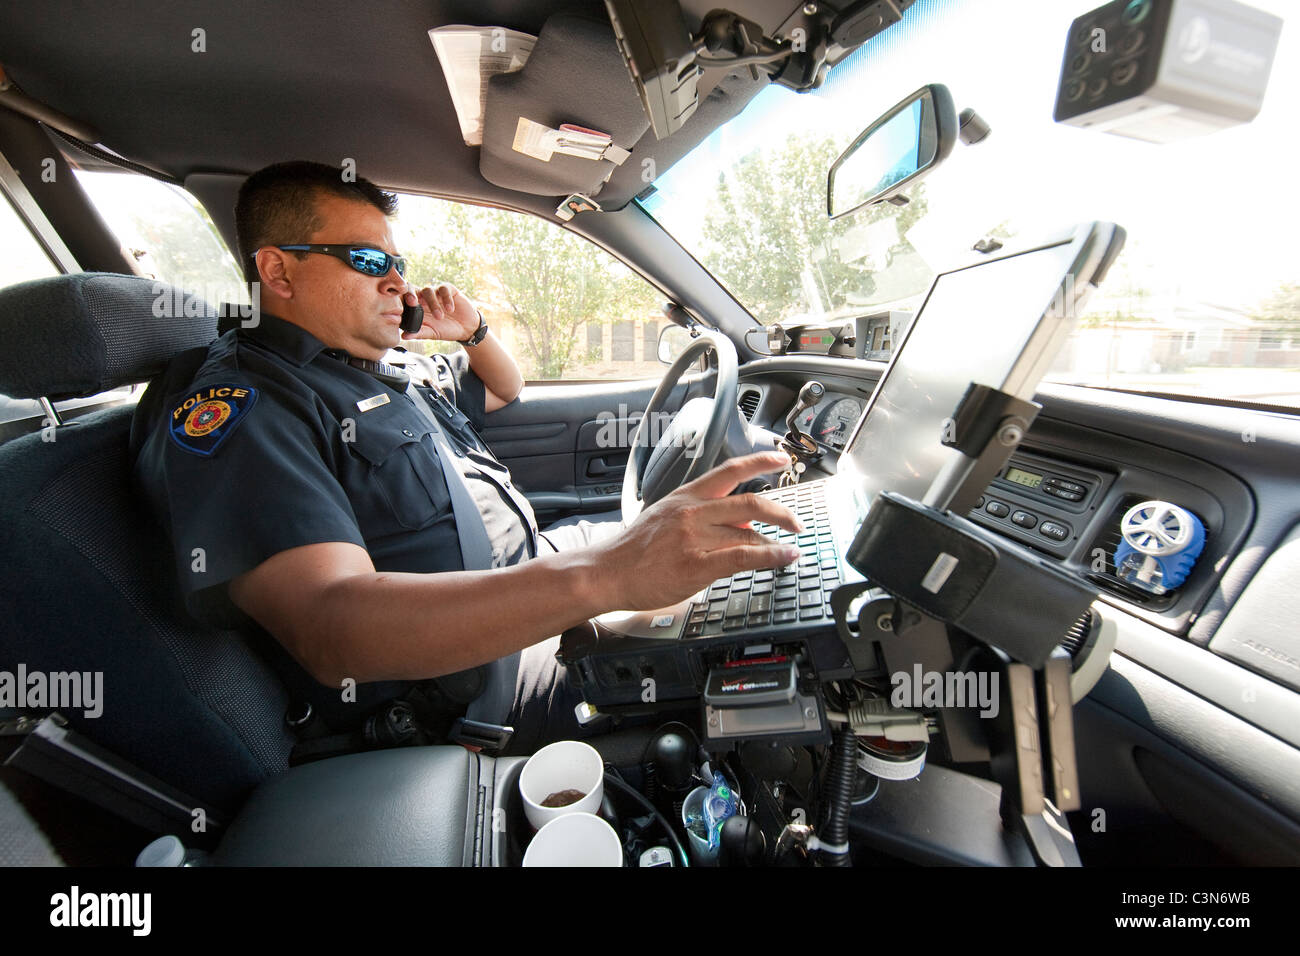 Hispanic Texas police officer talks on phone and types information into patrol car computer in Round Rock, Texas Stock Photo